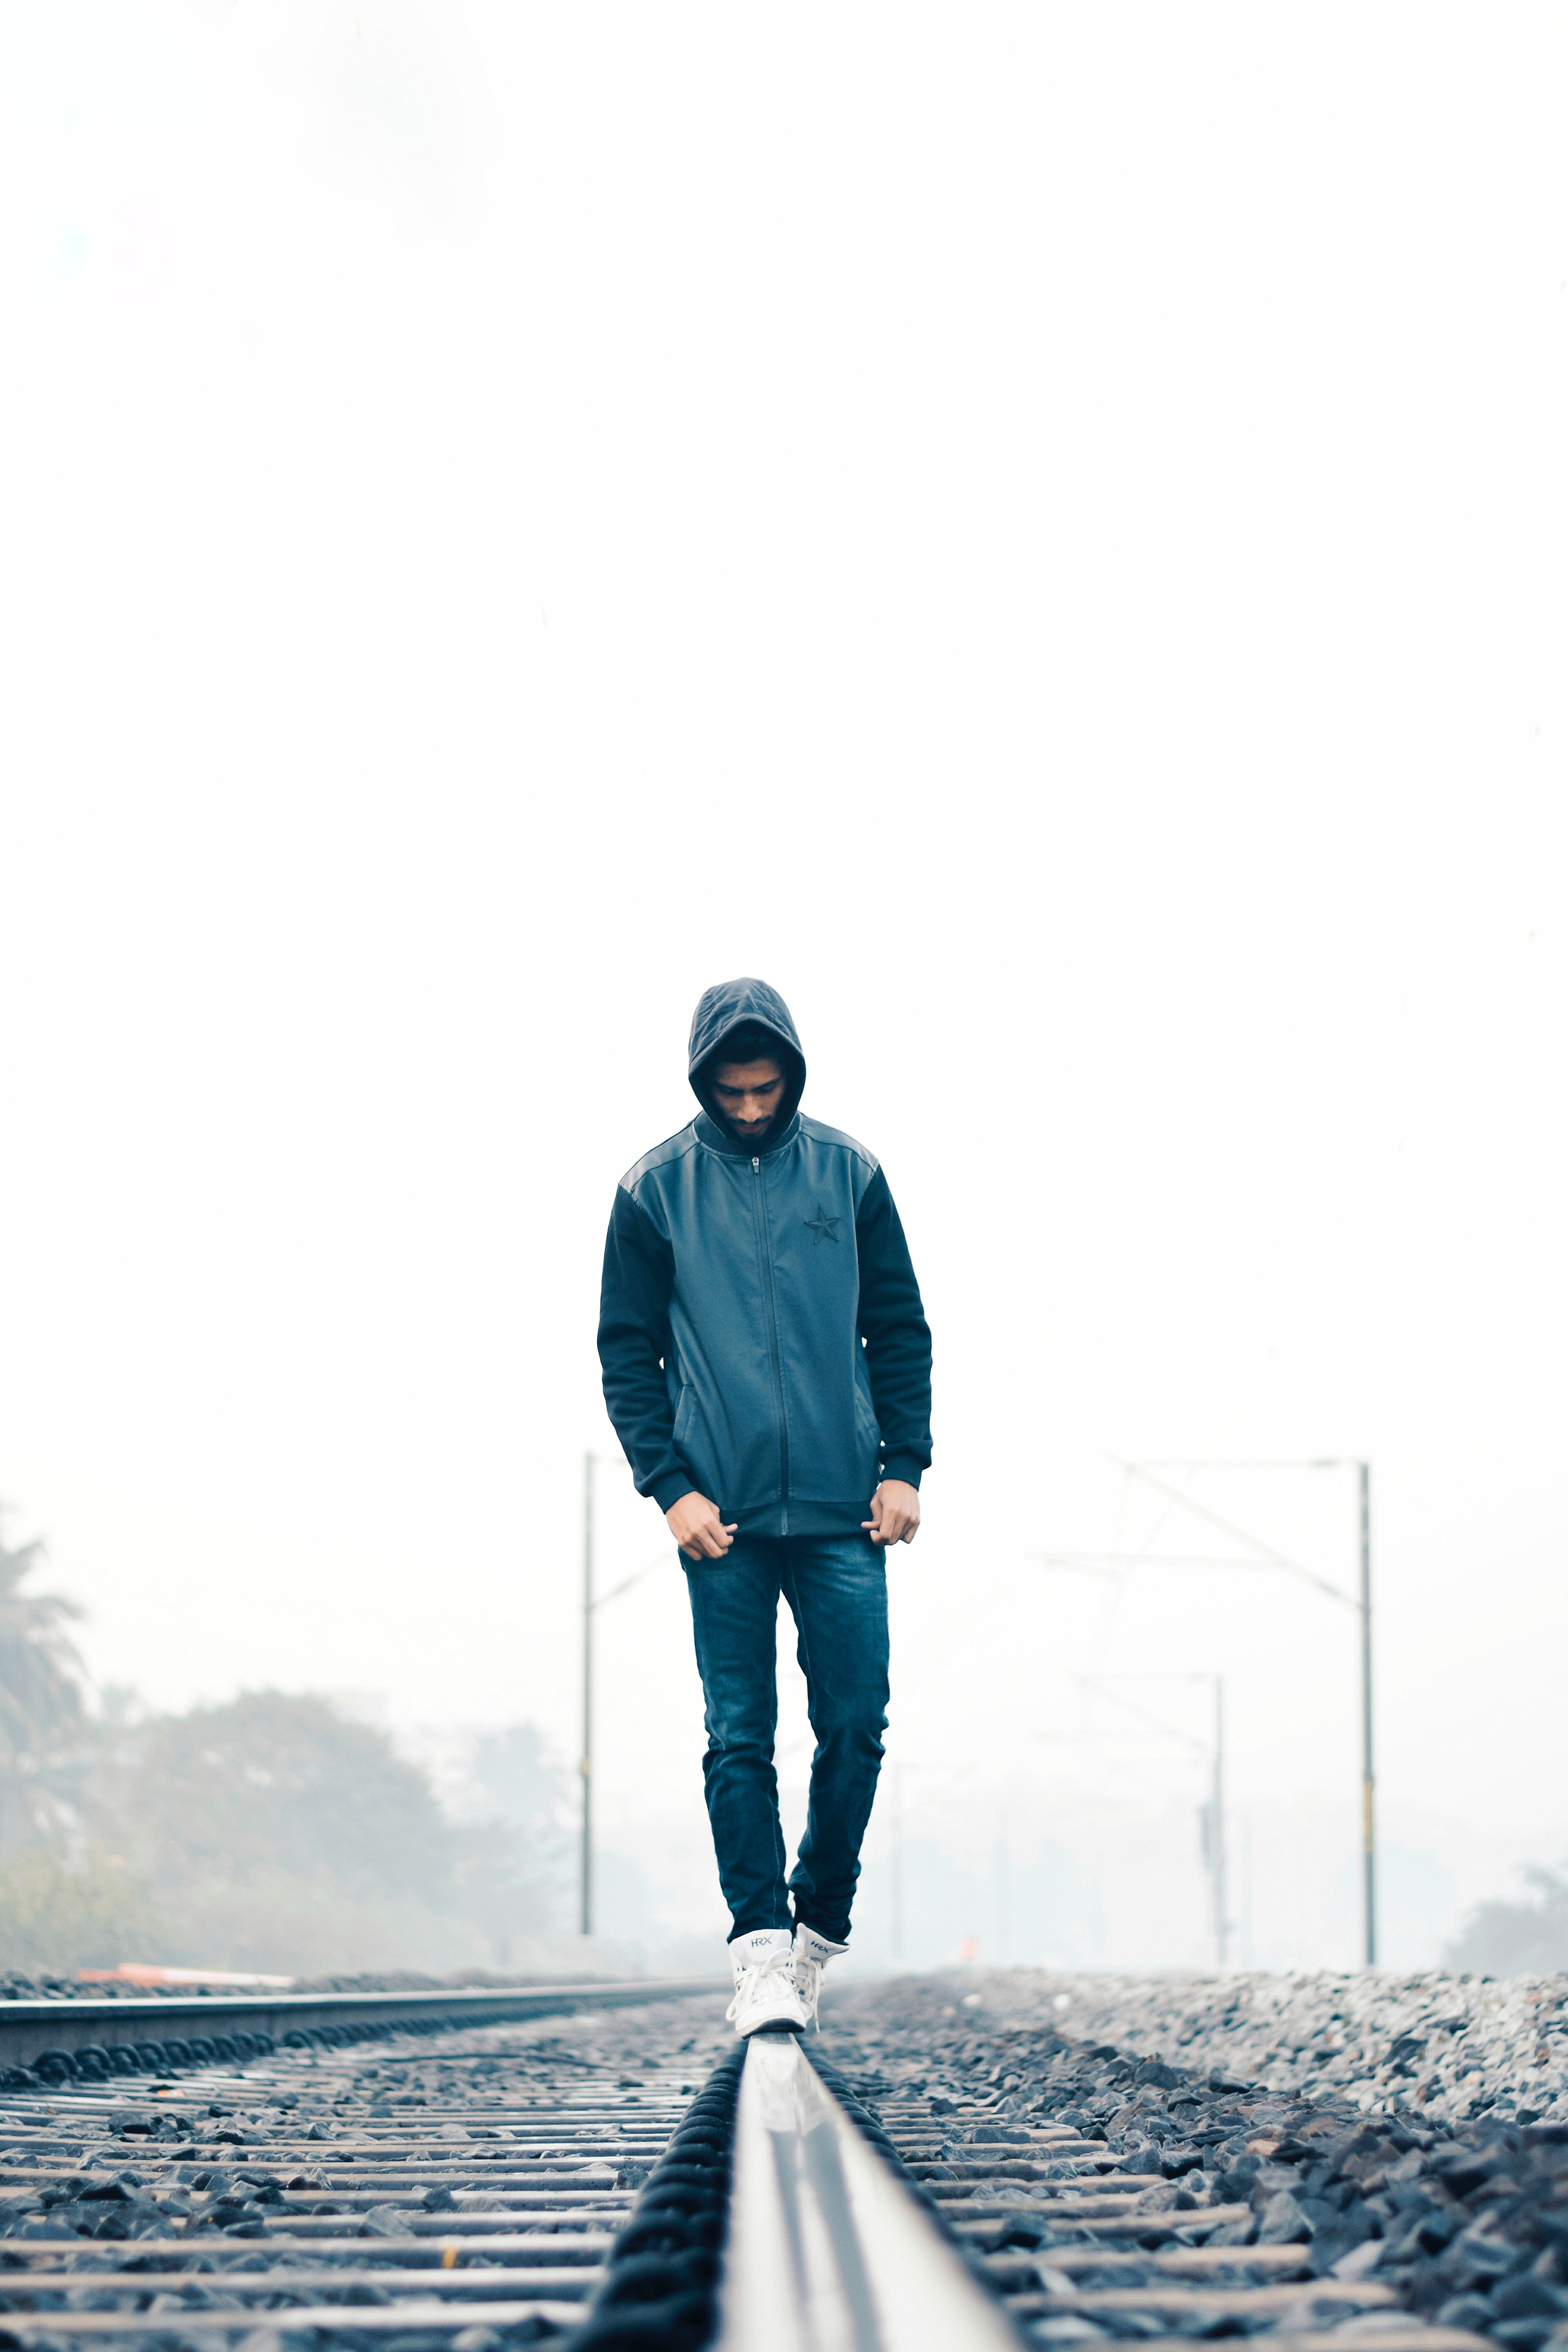 Man wearing gray and black zip-up hoodie with black denim jeans and white shoes walking on train railing behind white fog photo